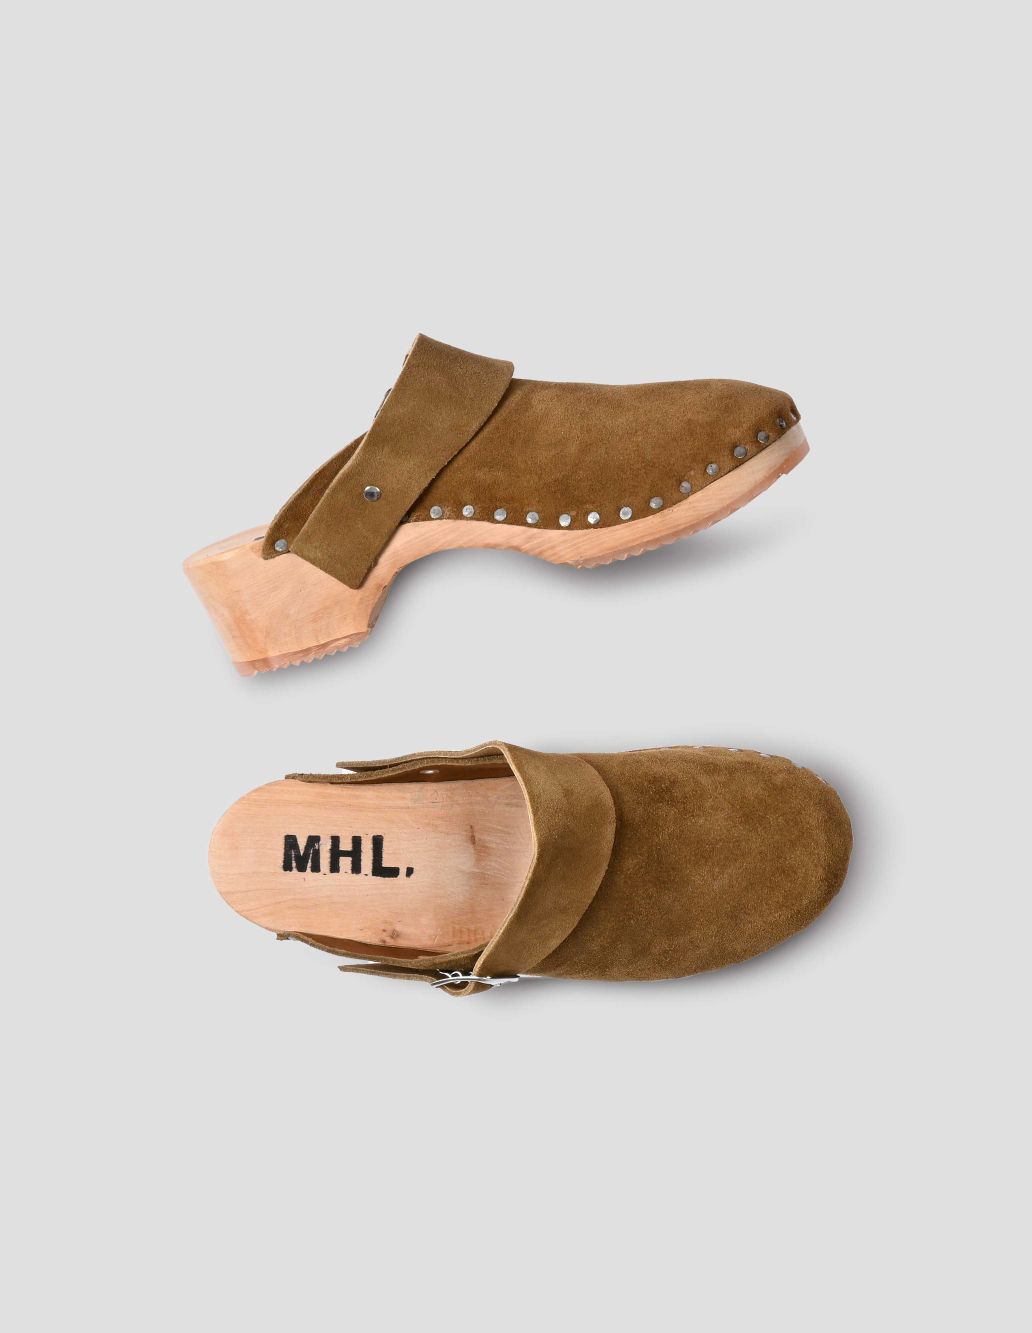 MARGARET HOWELL - Tobacco suede swivel clog | MHL. by Margaret Howell